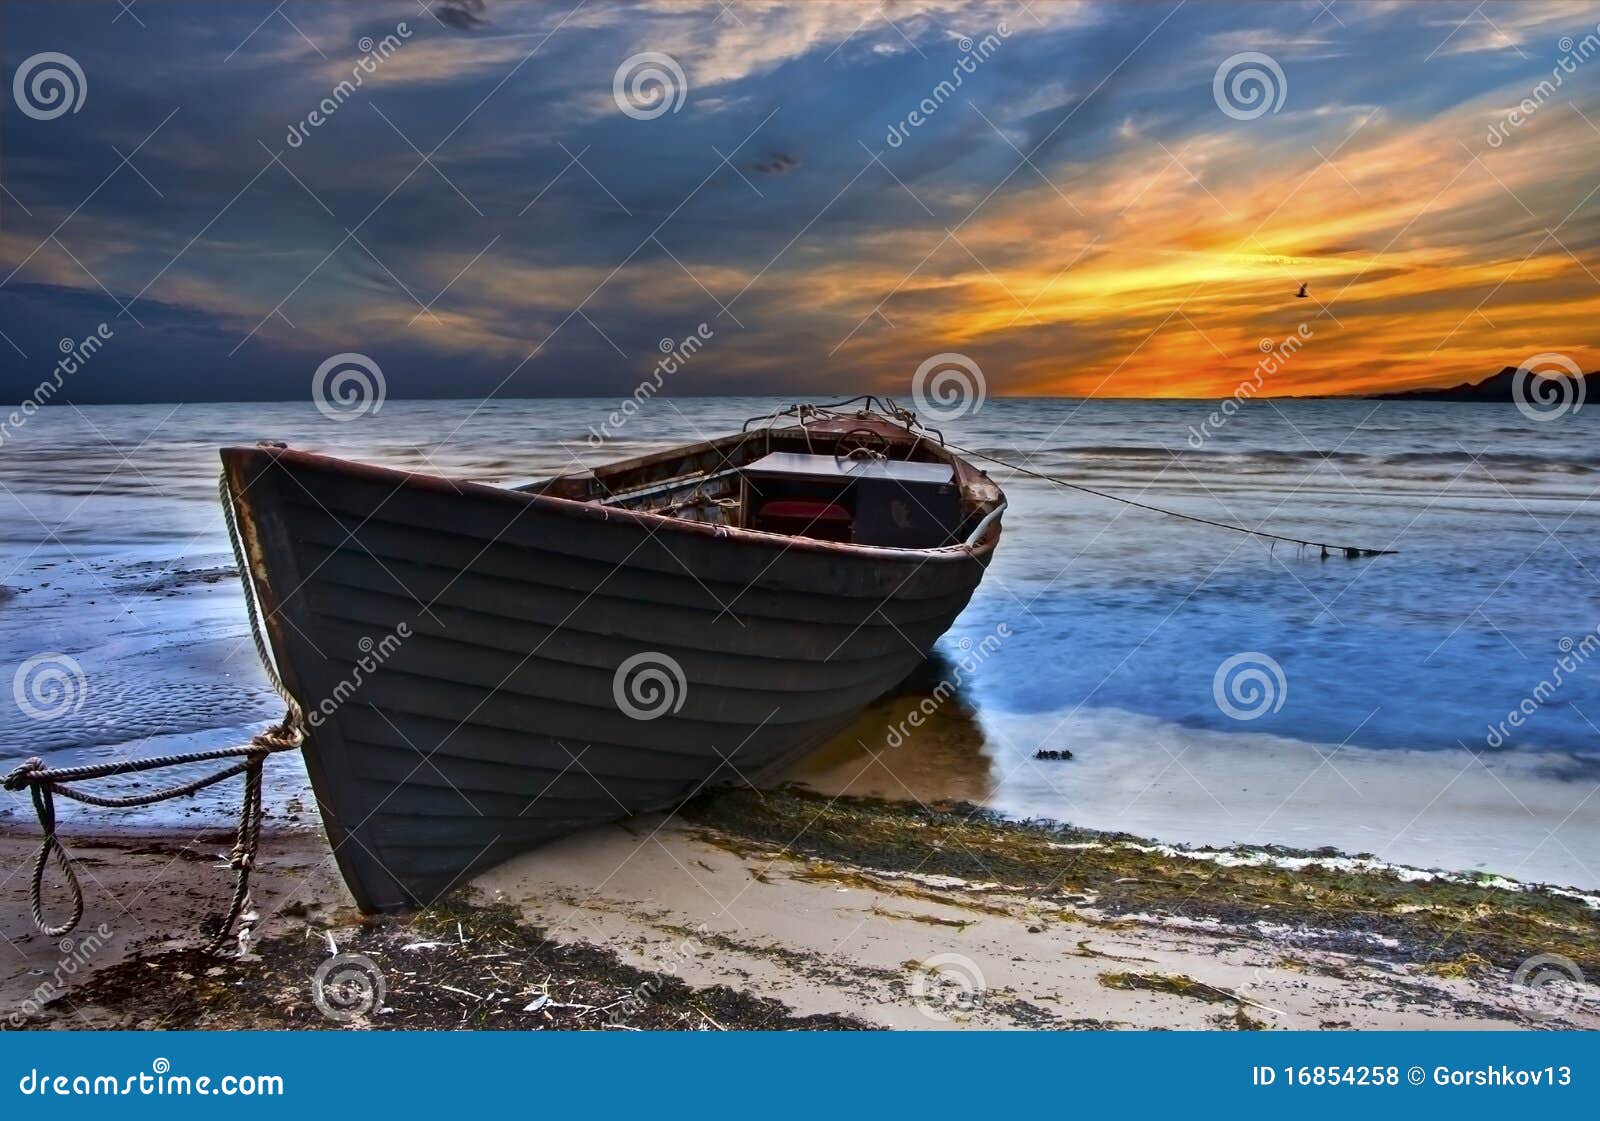 The old fishing boat after storm on a sandy beach of a tropical sea .